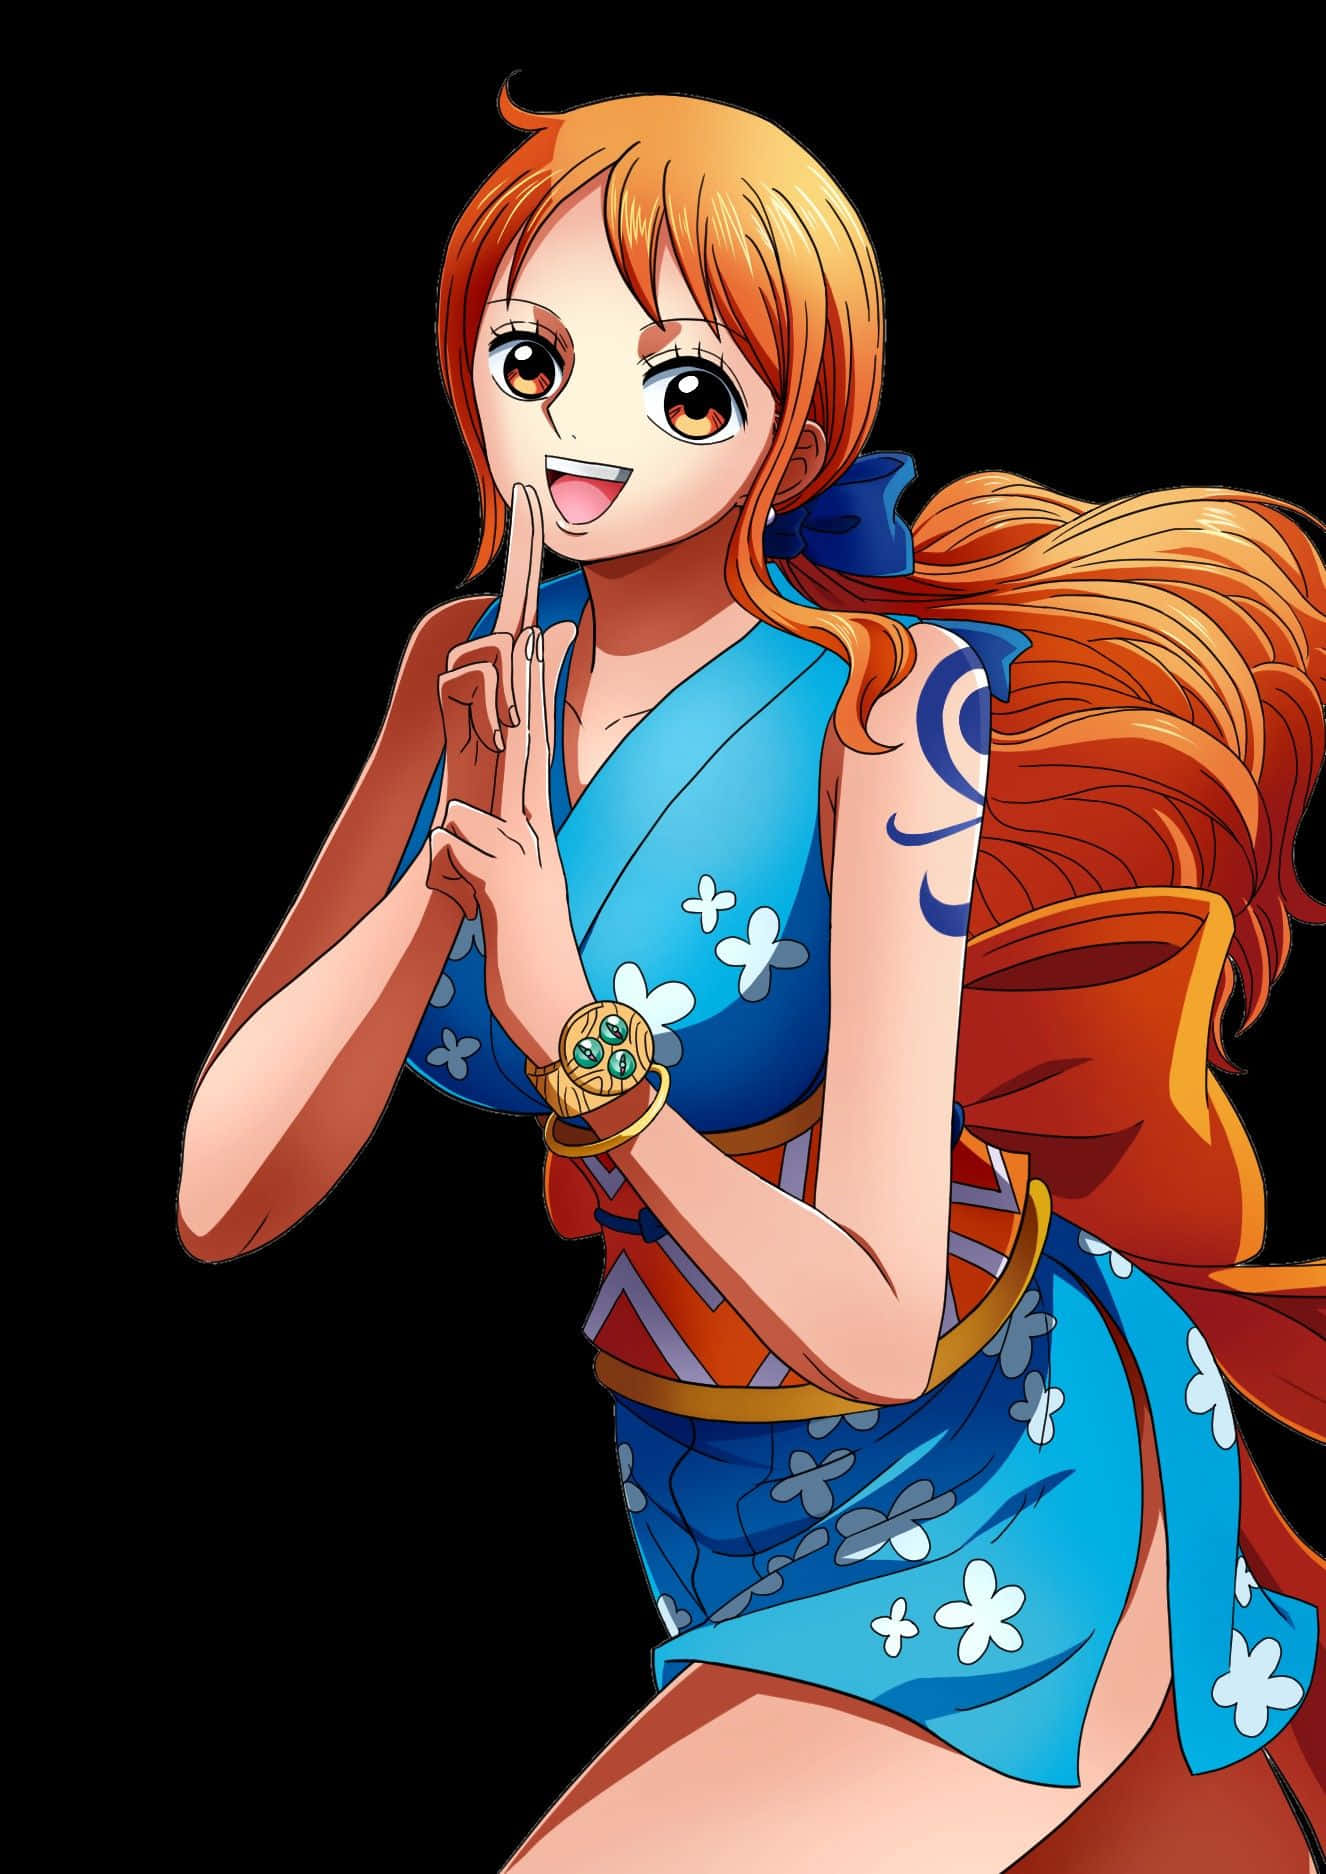 Who is Nami in One Piece? 